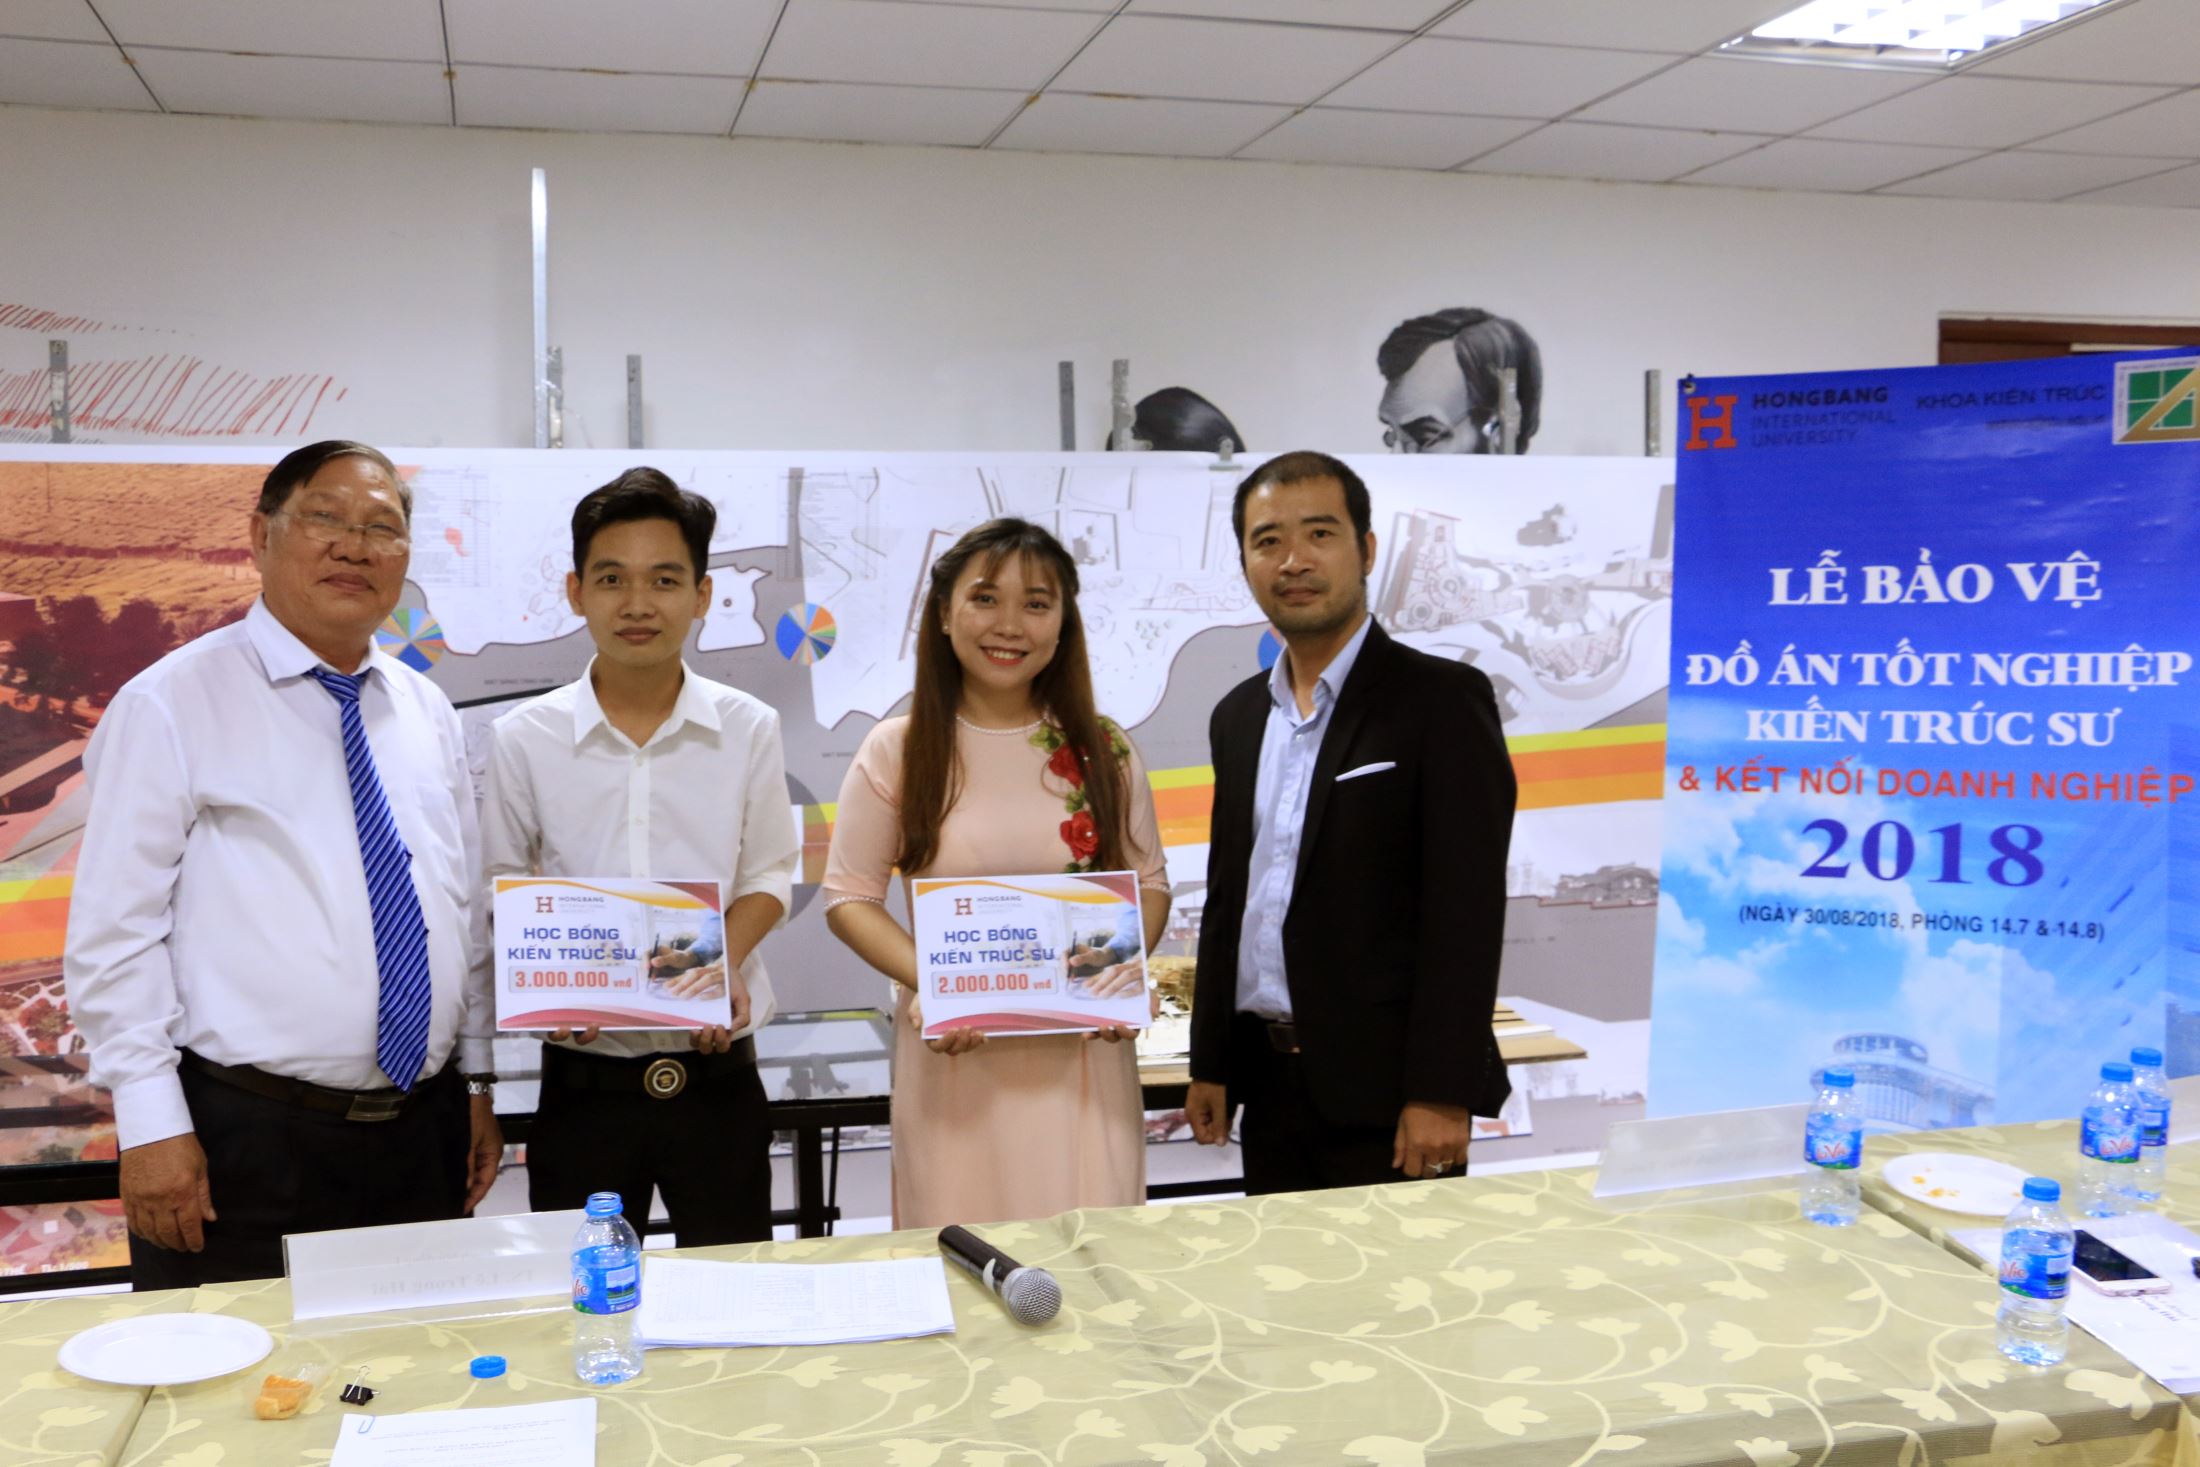 Nguyen Thi My Ngoc (second from right) received architecture scholarship from business partner of HIU in 2018 